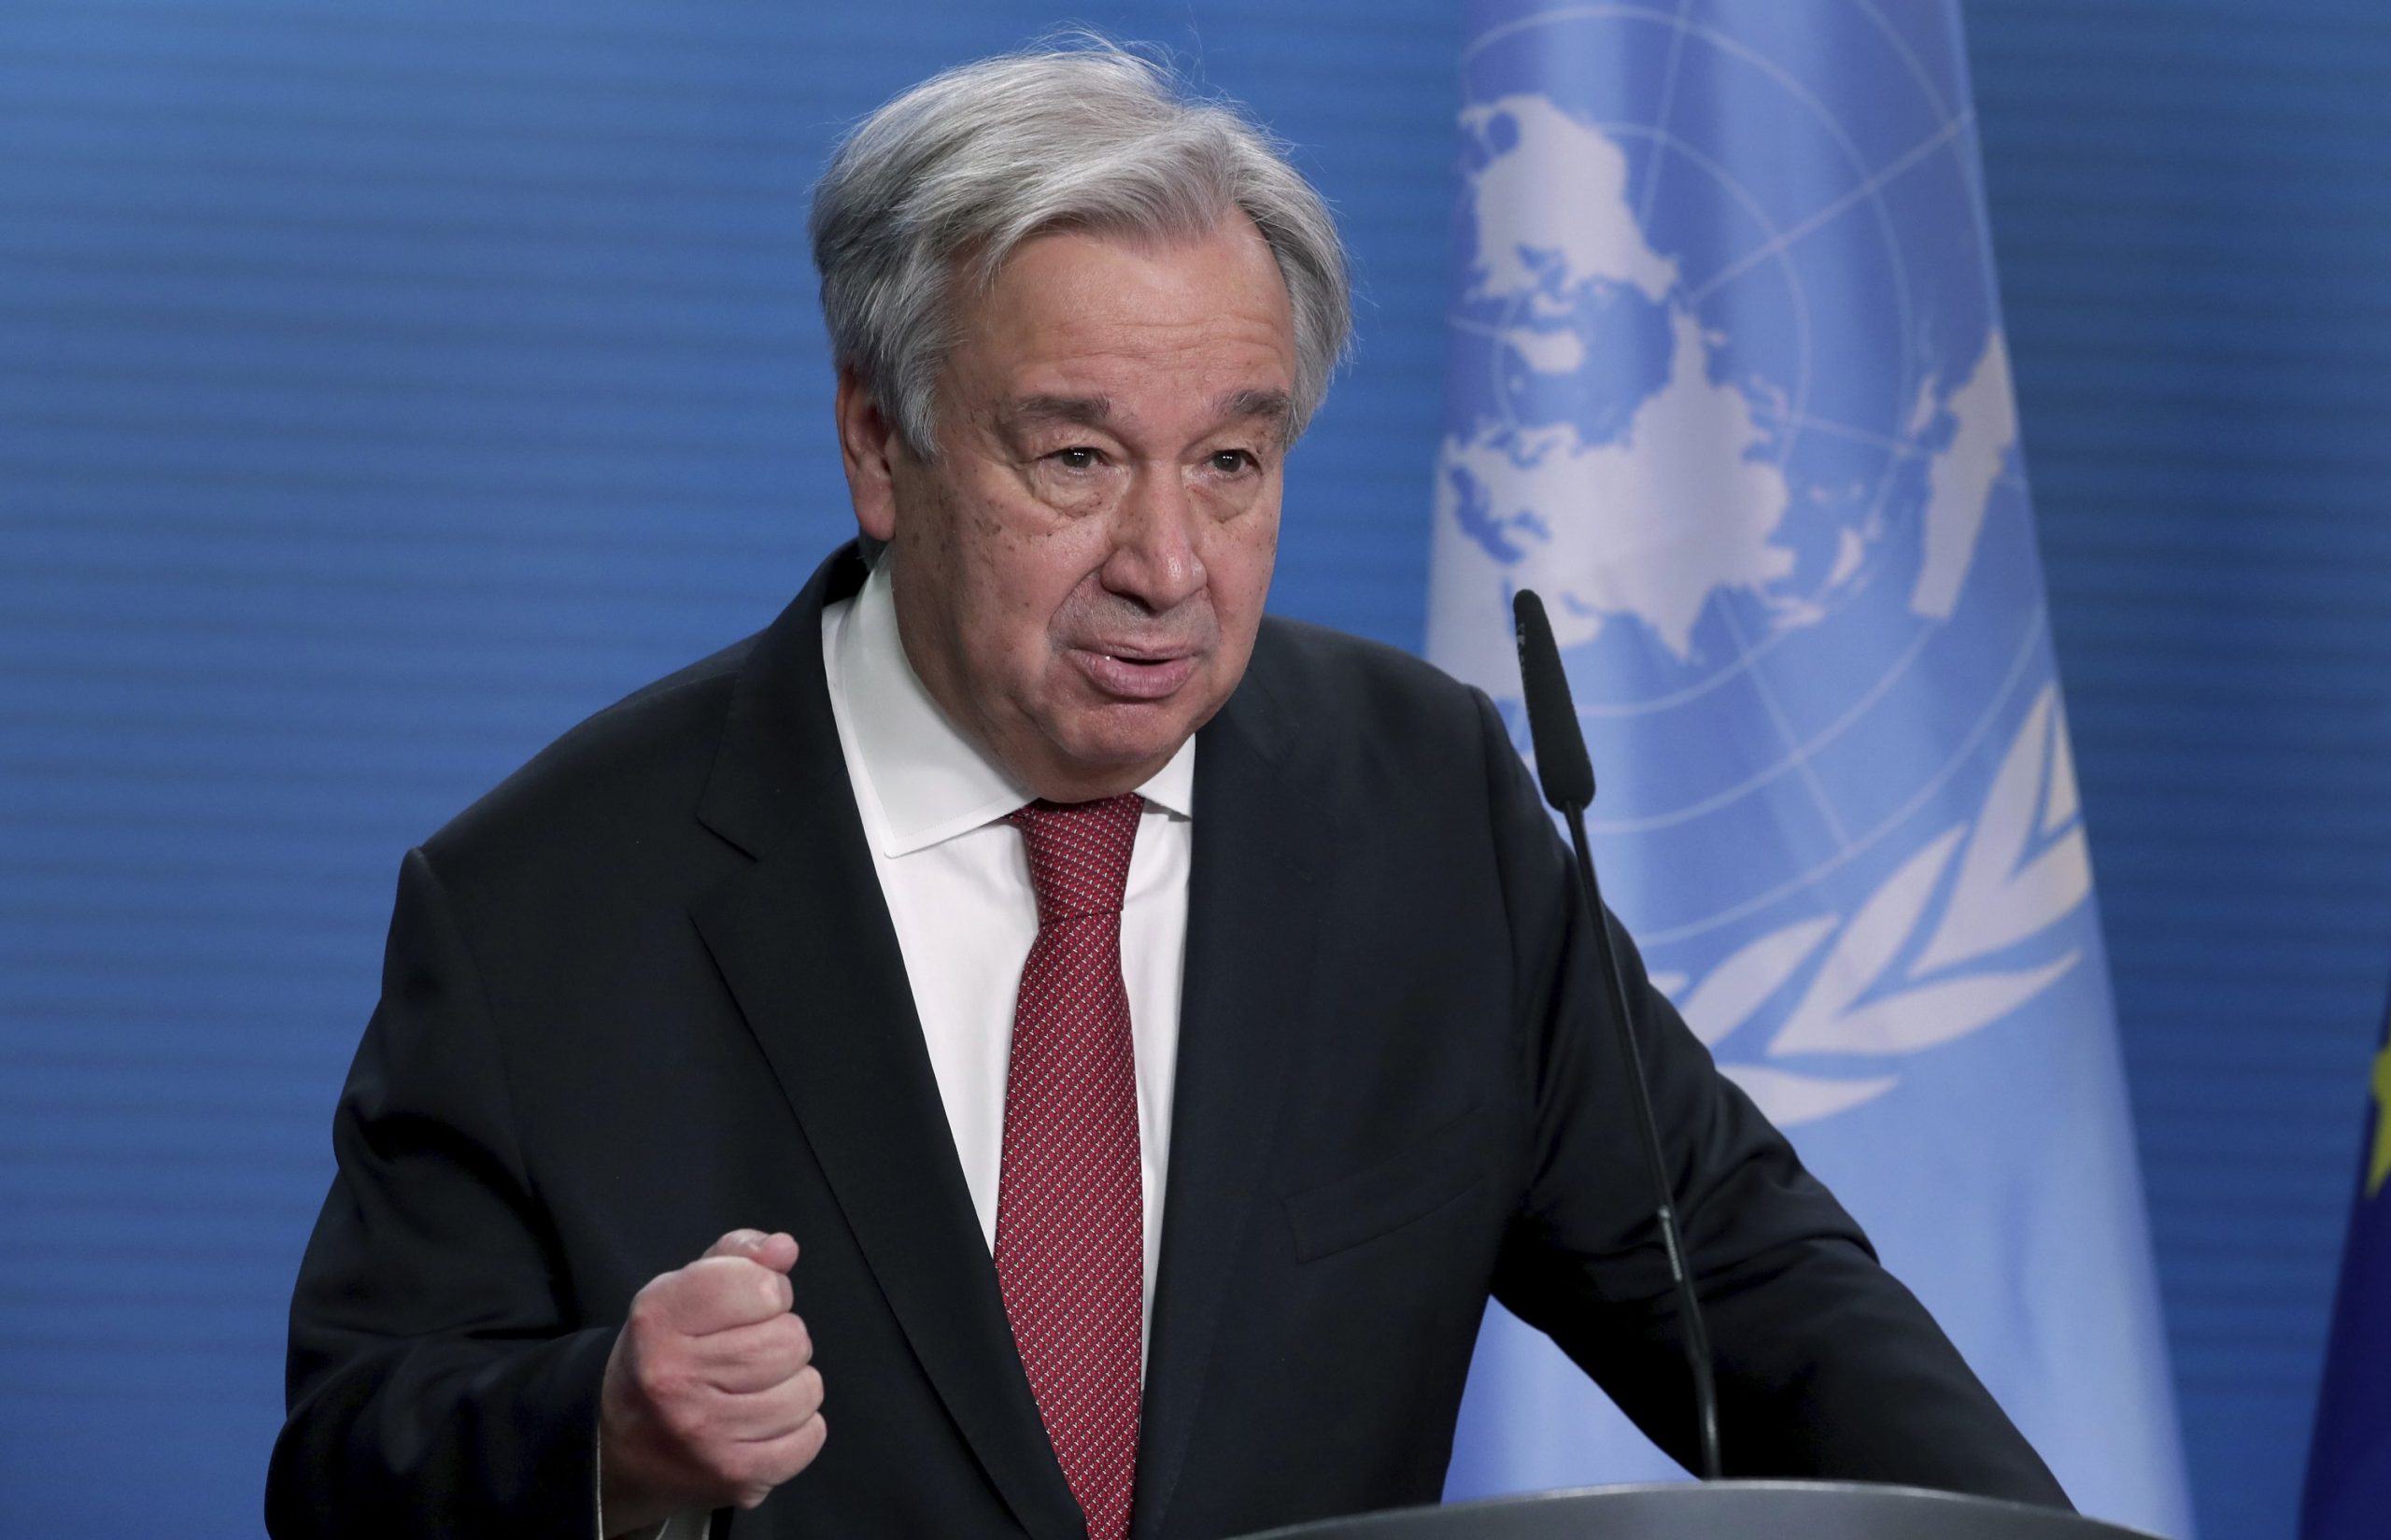 UN Chief Calls on All Parties in Afghanistan to Exercise 'Utmost Restraint'